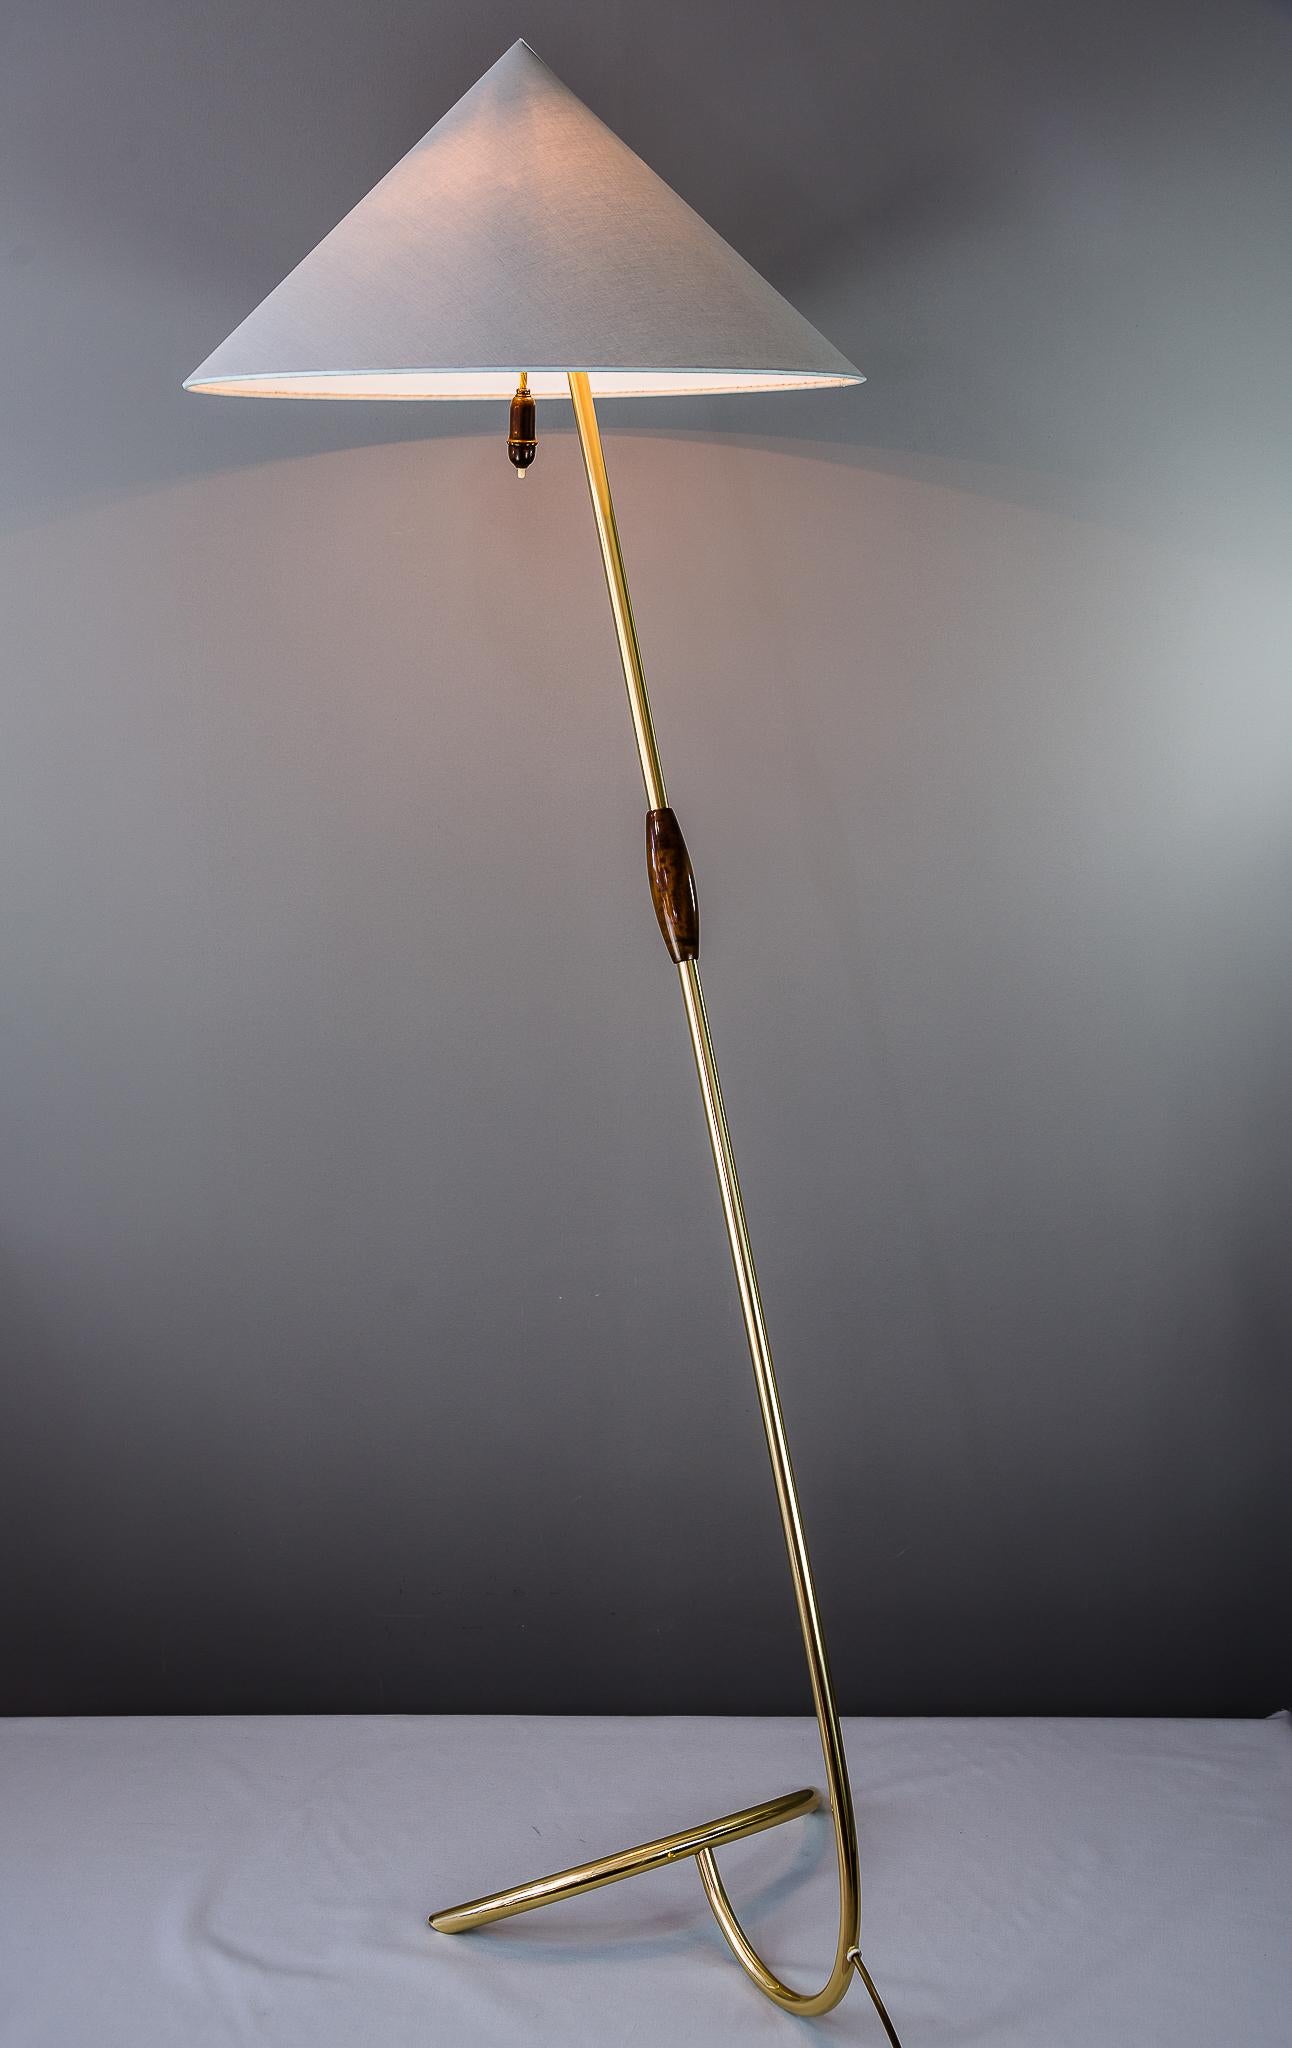 Rupert Nikoll floor lamp, circa 1950s.
The floor lamp is polished and stove enamelled.
The shade is replaced ( new ).
The original wood handle is polished.
The floor lamp is in a excellent condition.